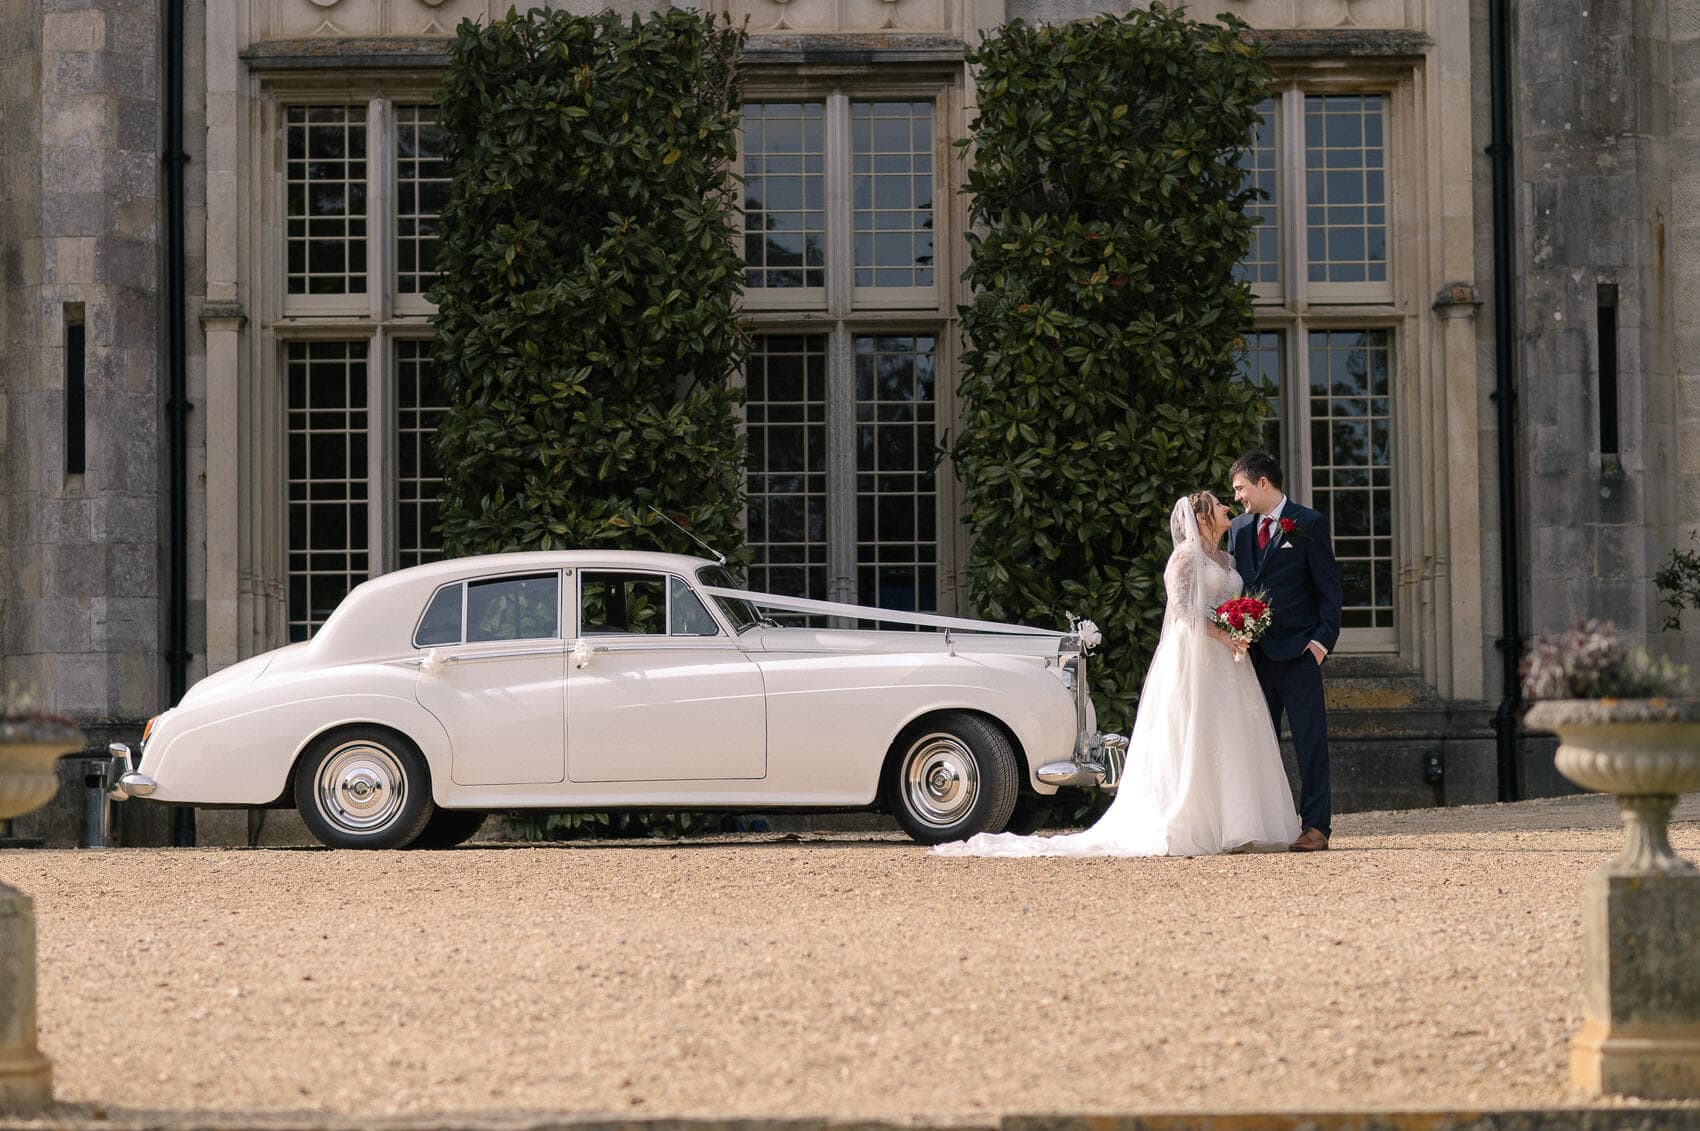 Bride and Groom with classic car at Highcliffe castle wedding